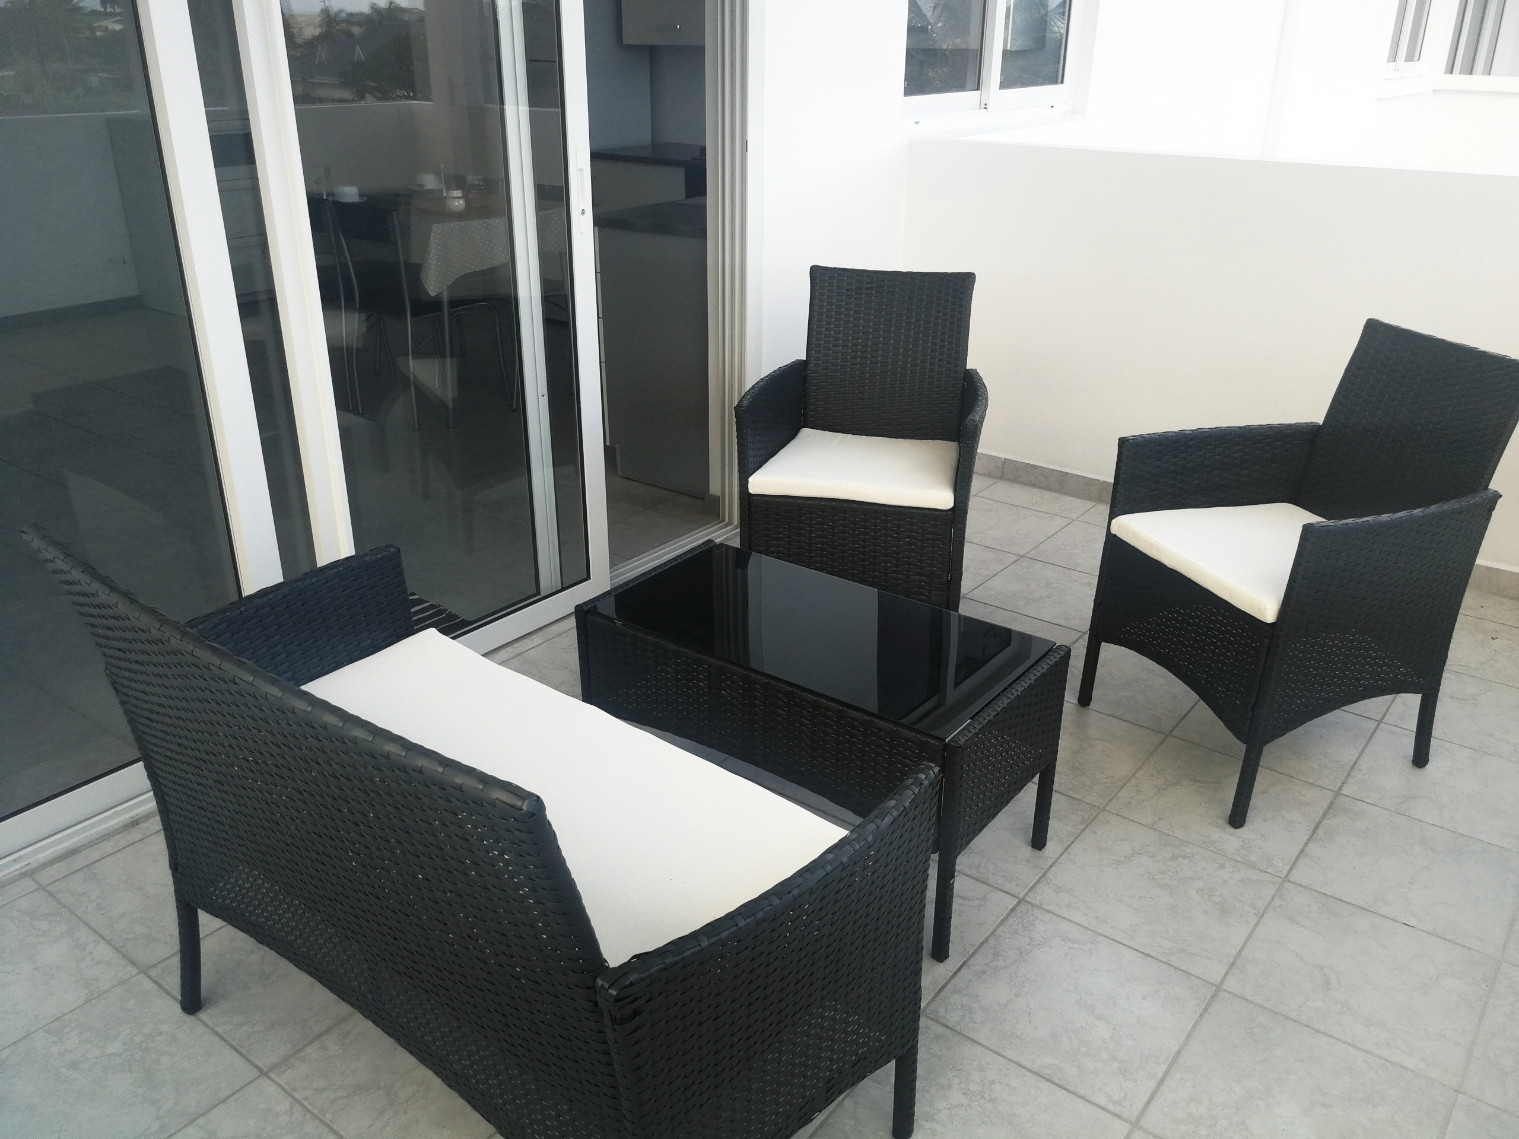 
                                                Location
                                                 Appartement 75m² - Punaauia